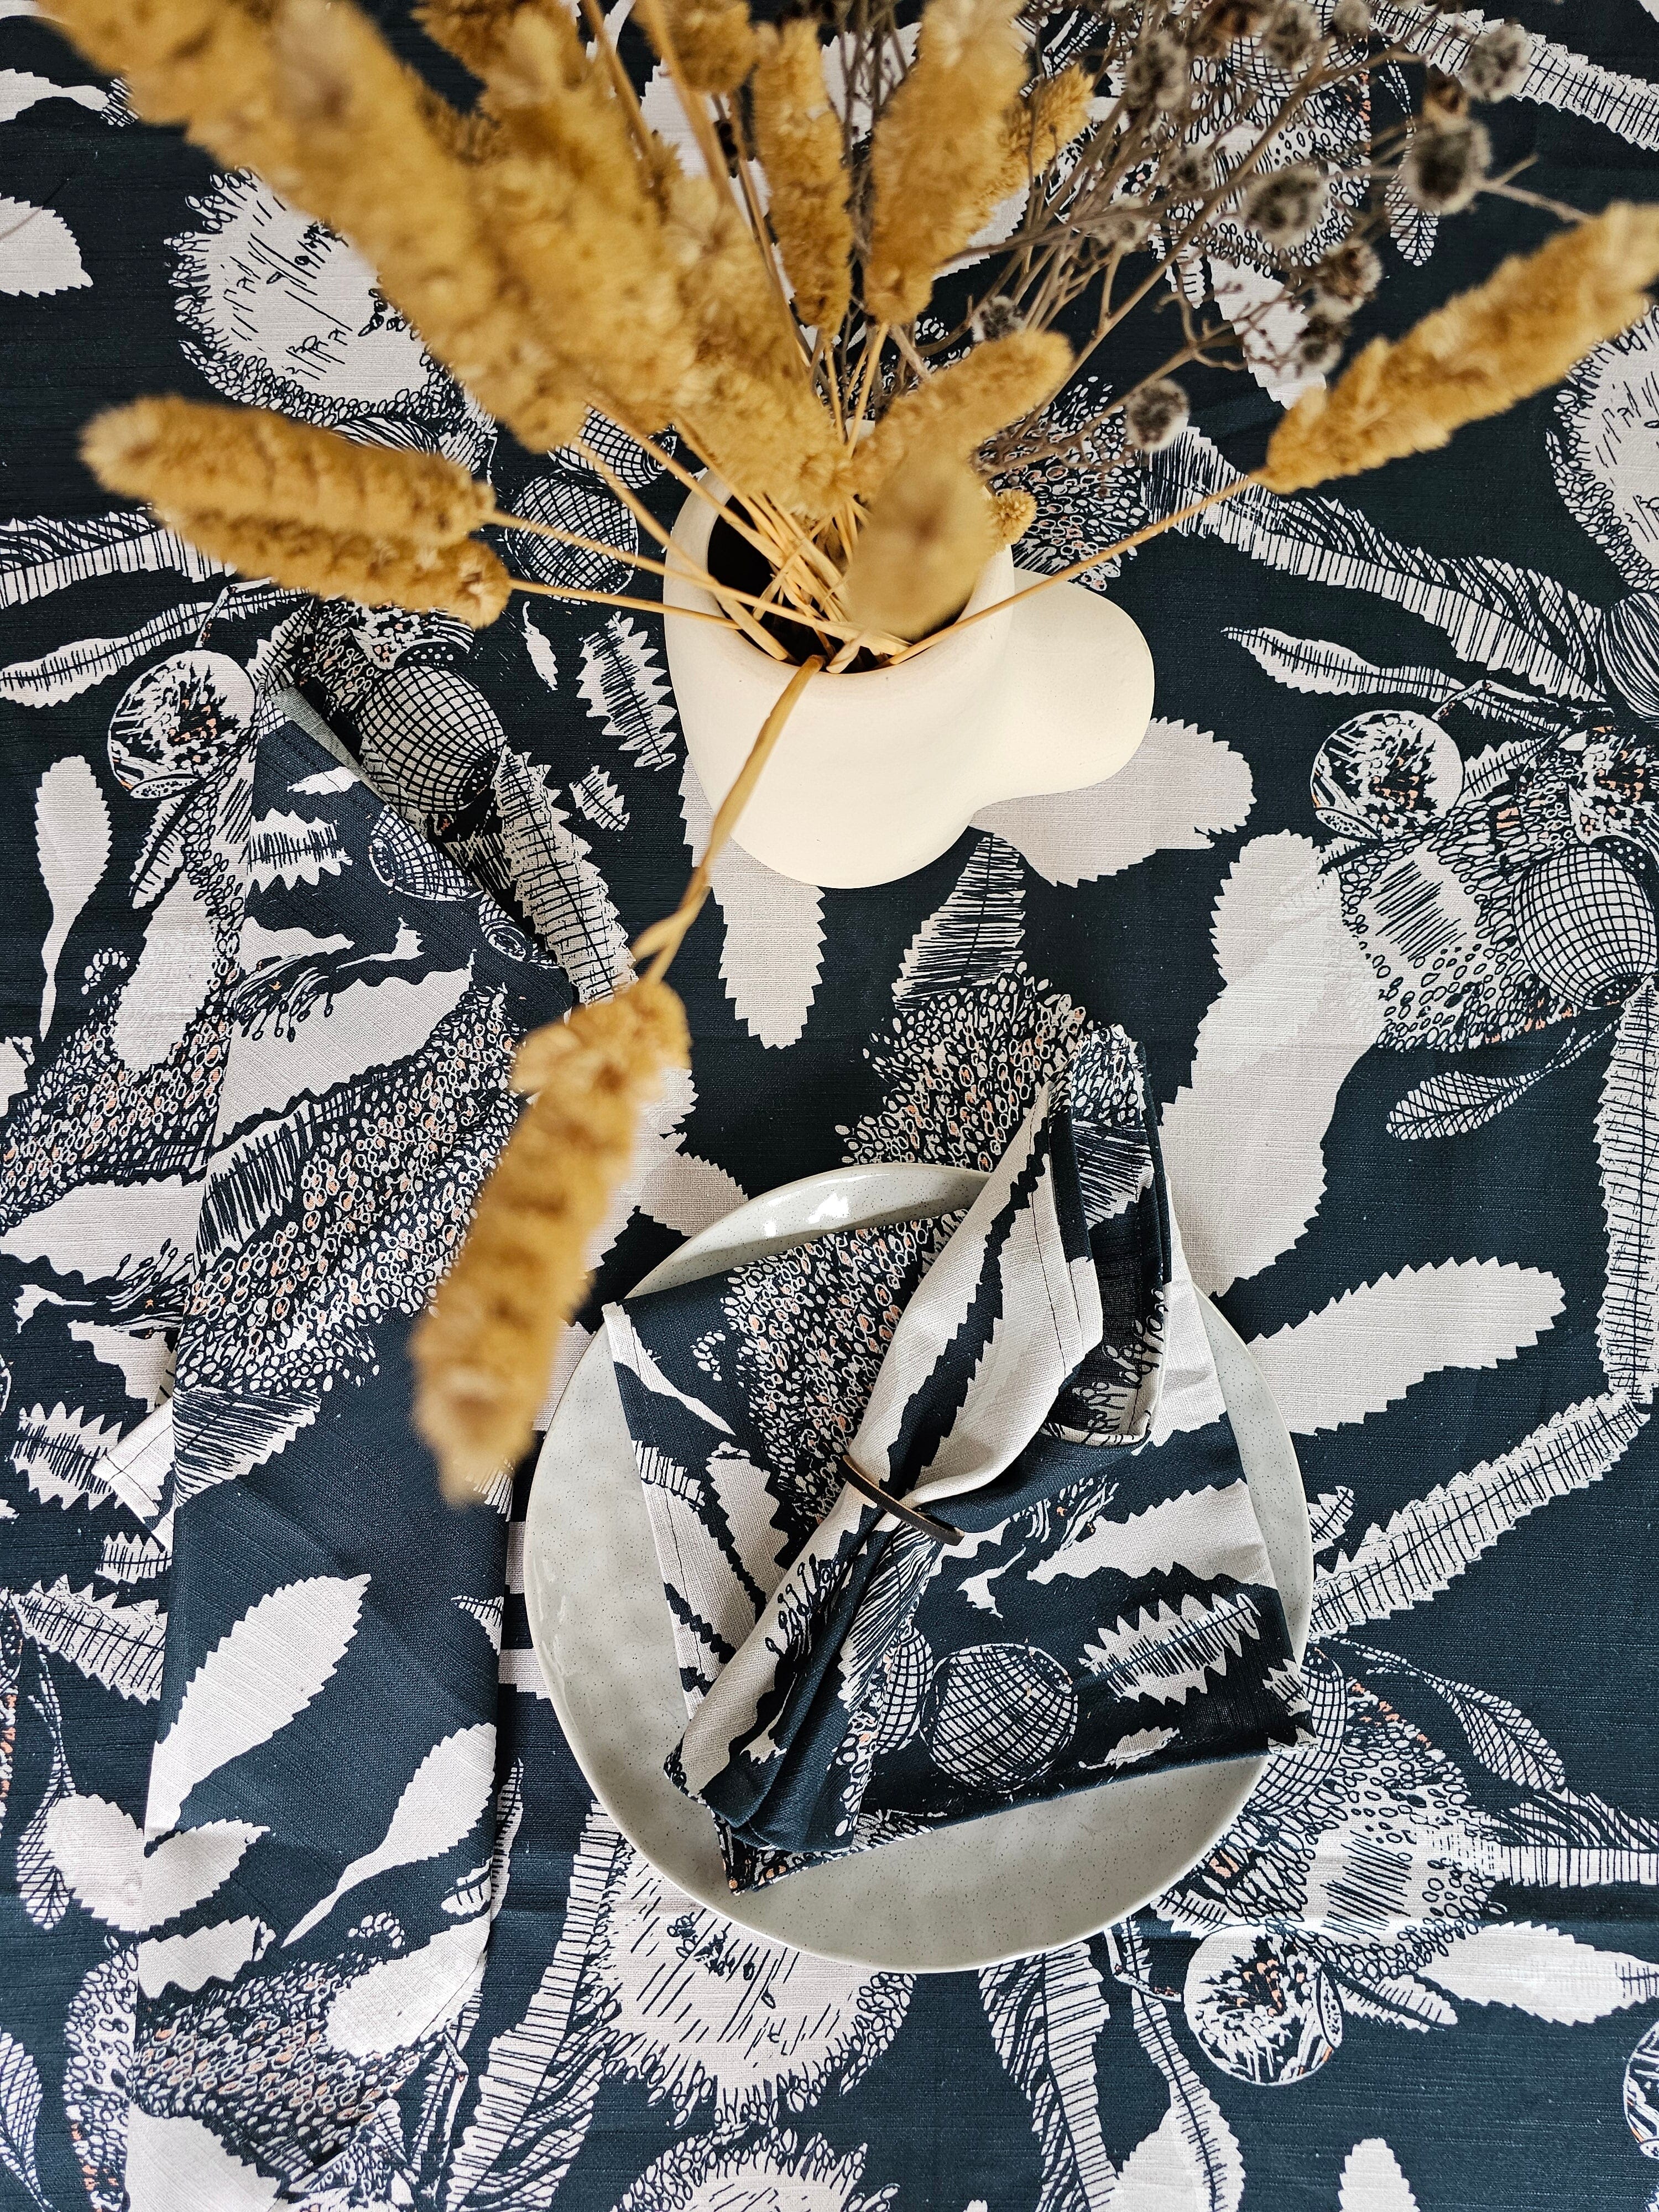 Printed Organic Linen Table Cloth - Sawtooth Banksia table cloth The Spotted Quoll 